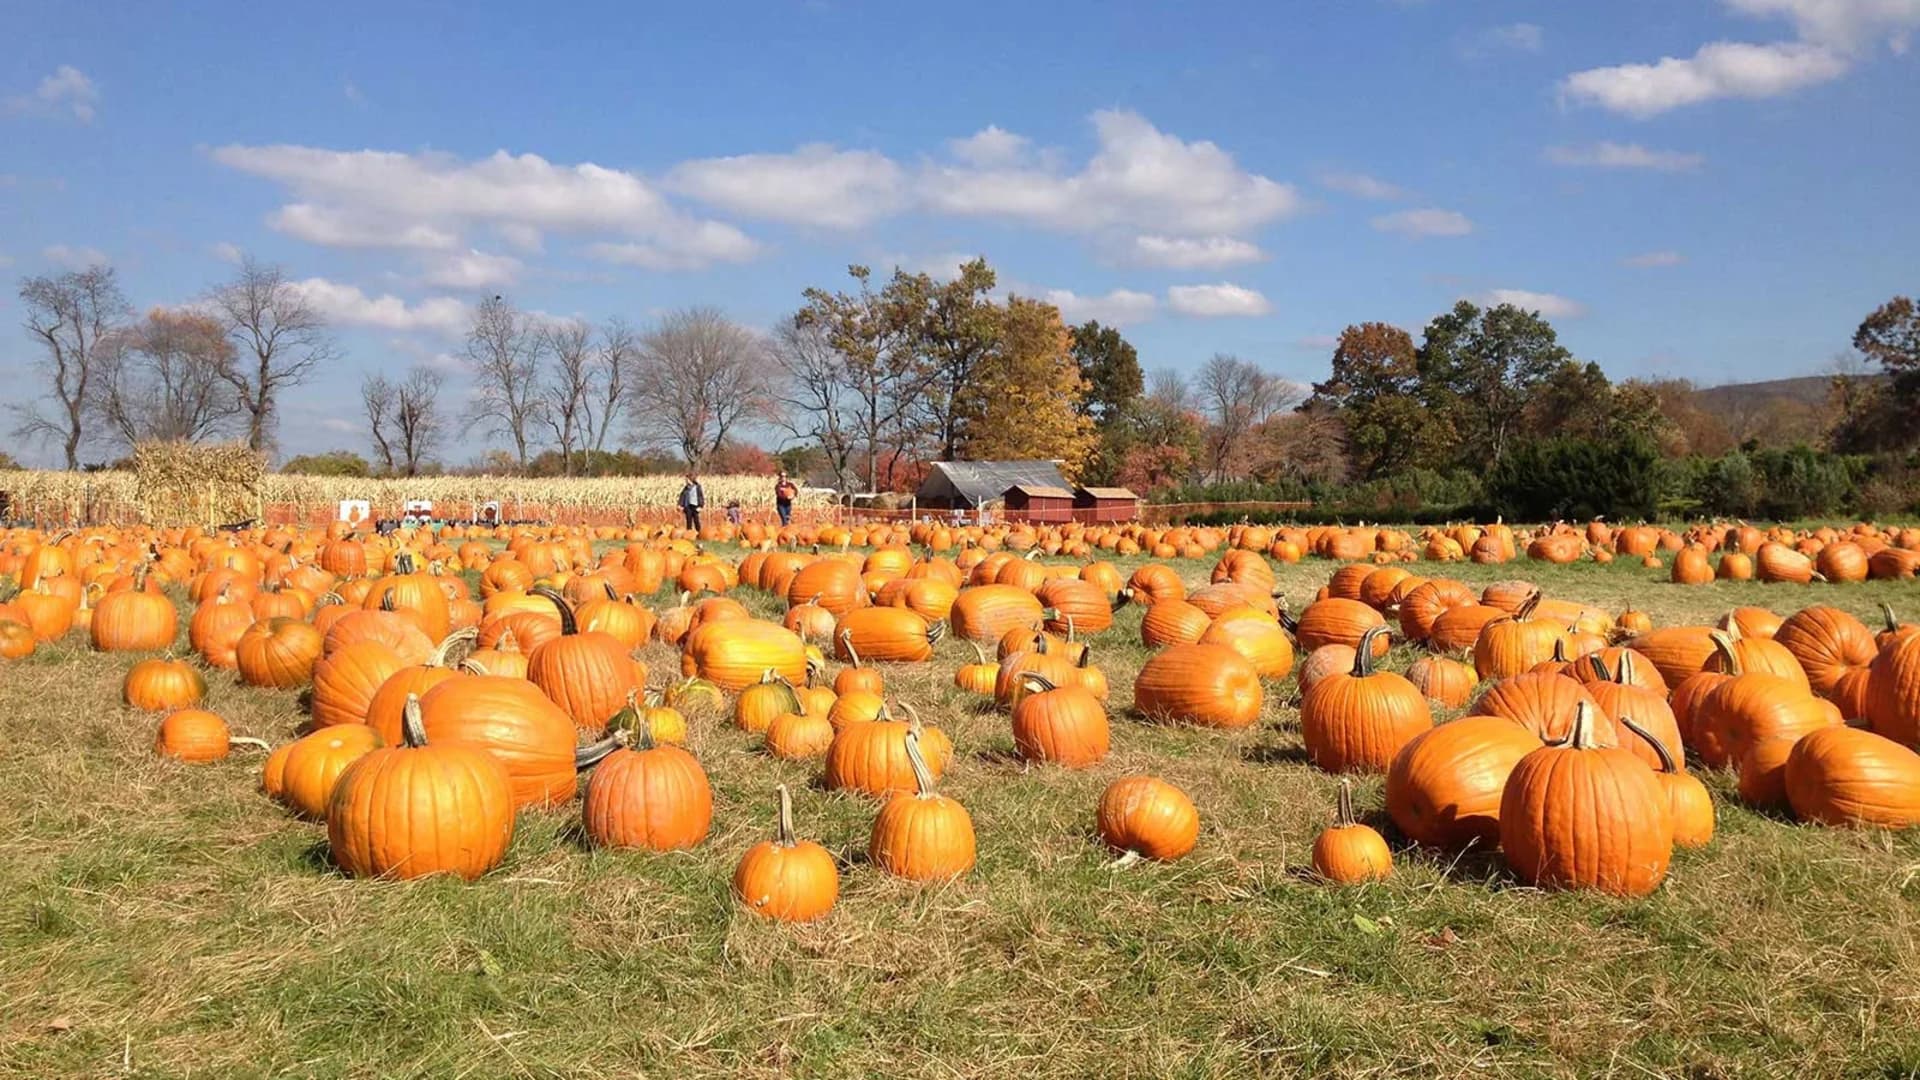 Guide: Where to go pumpkin picking in Connecticut